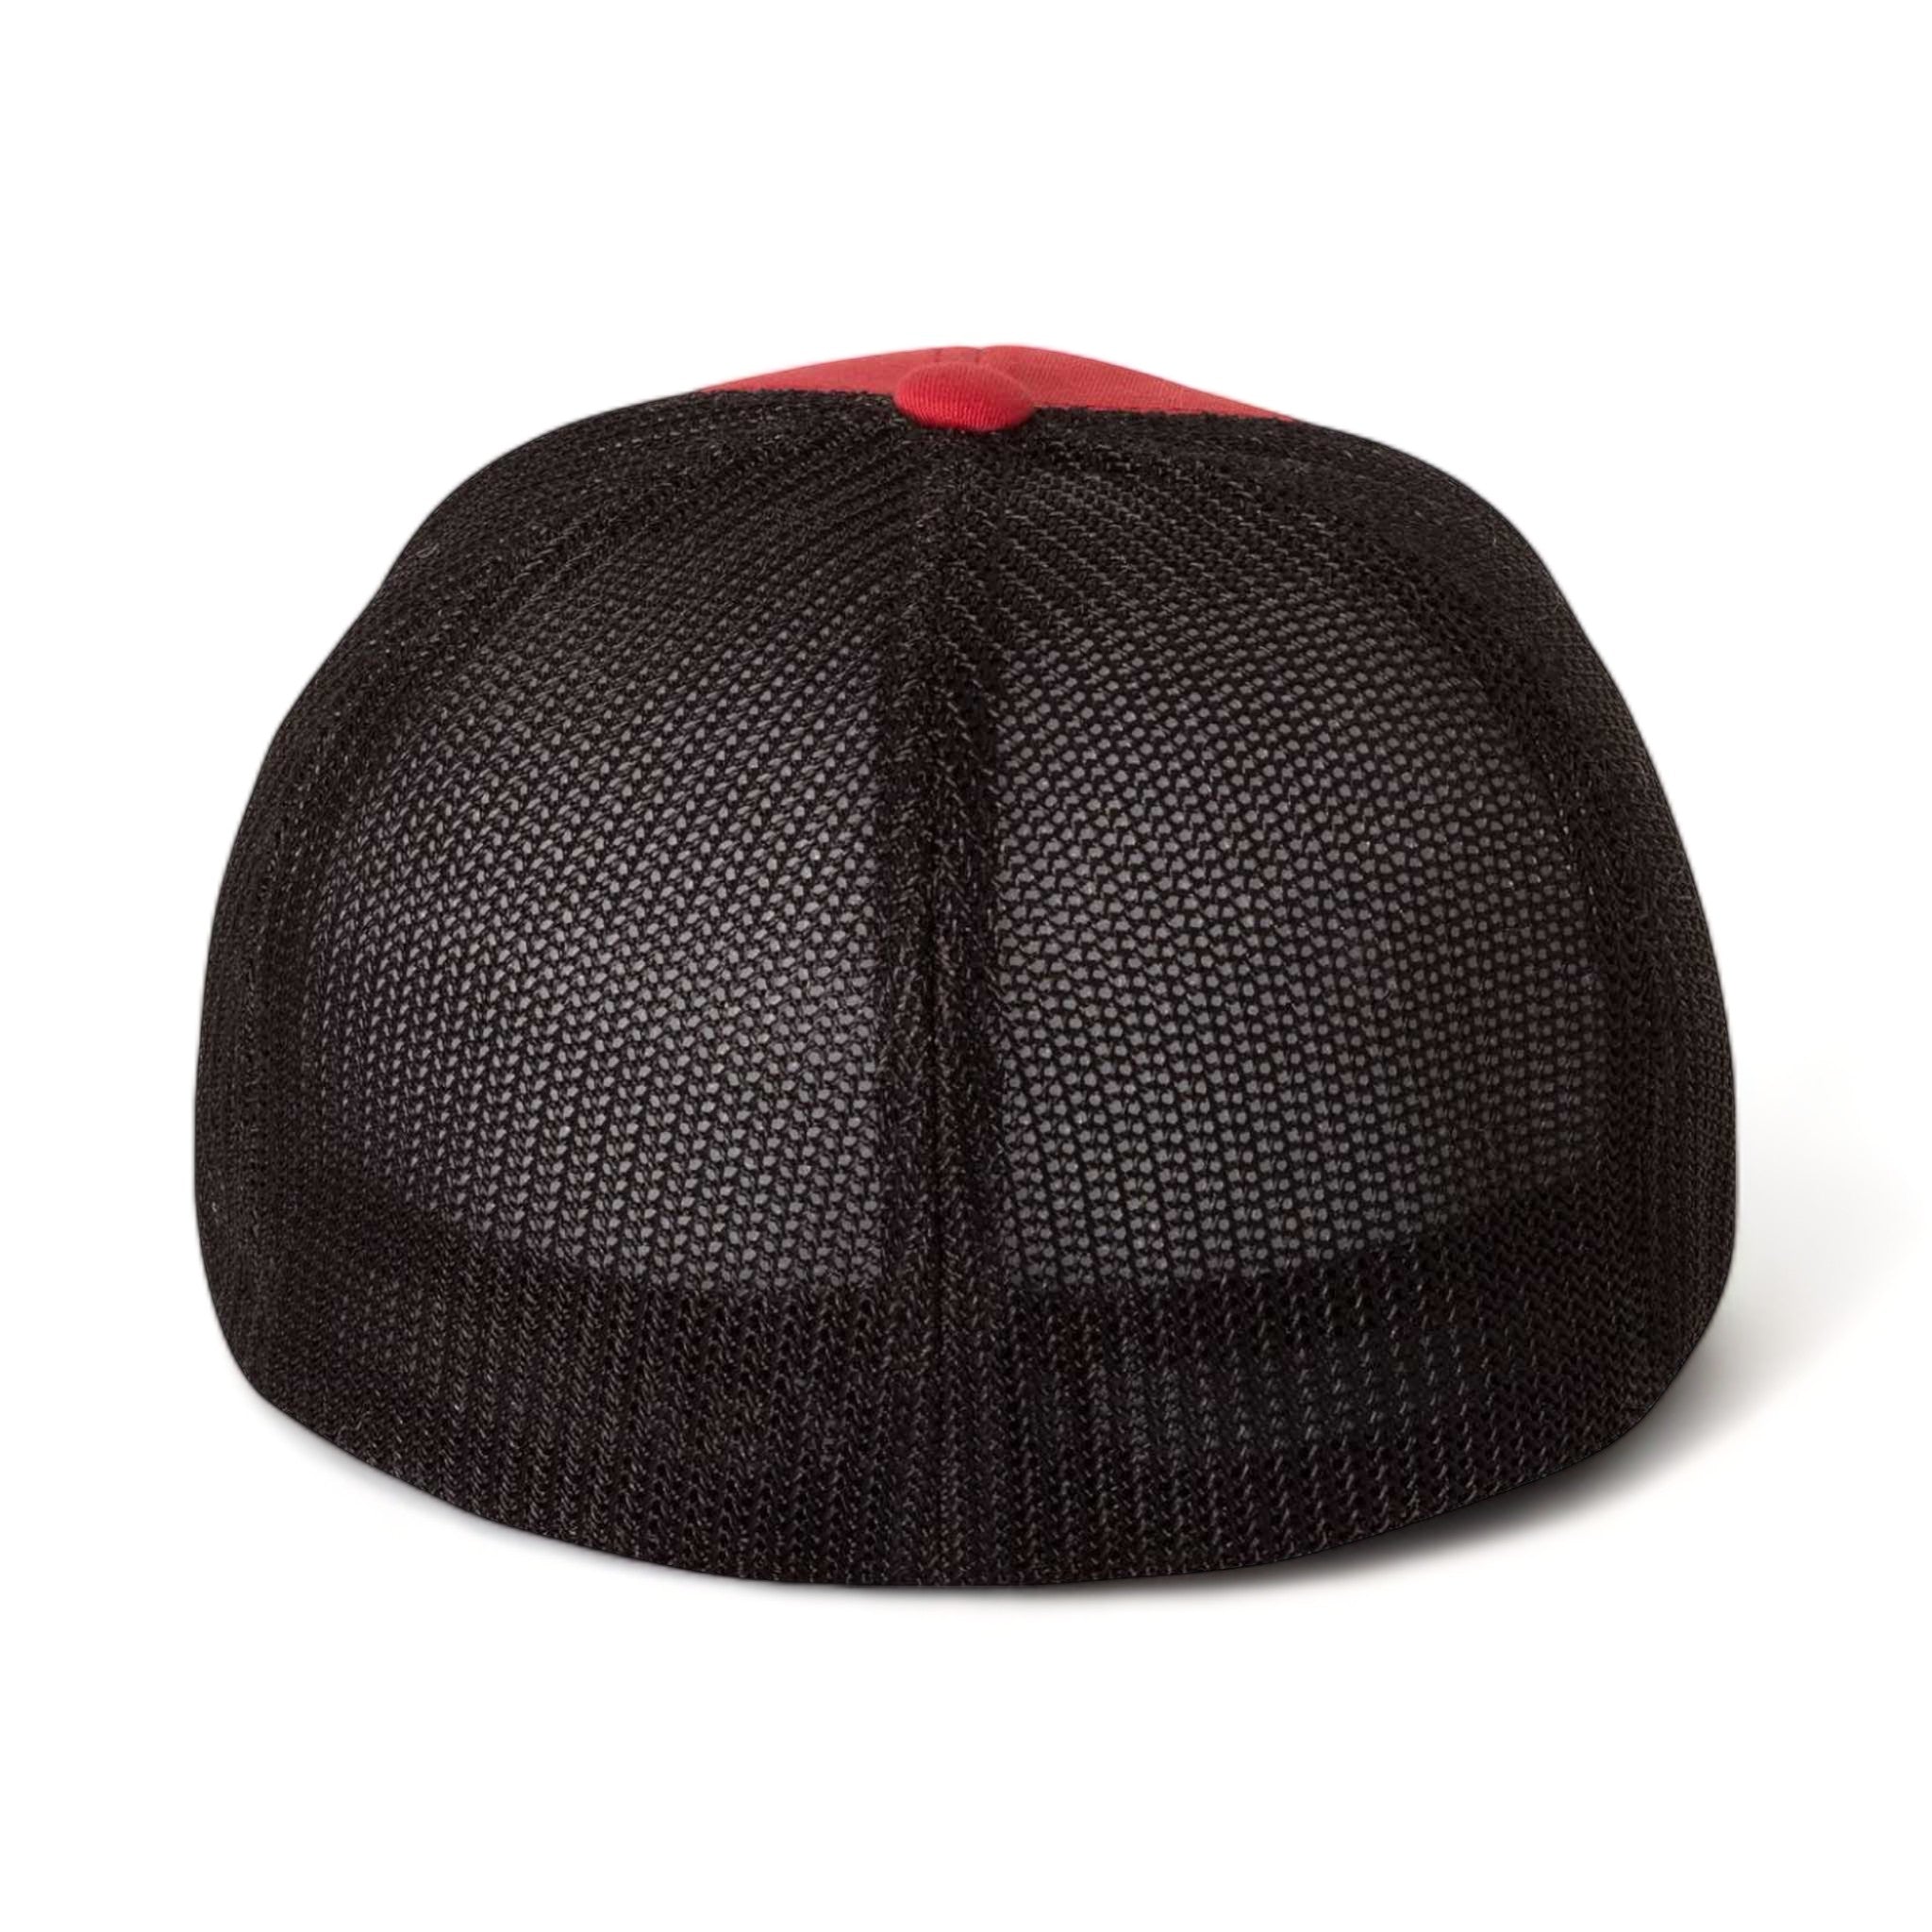 Back view of Flexfit 6511 custom hat in red and black